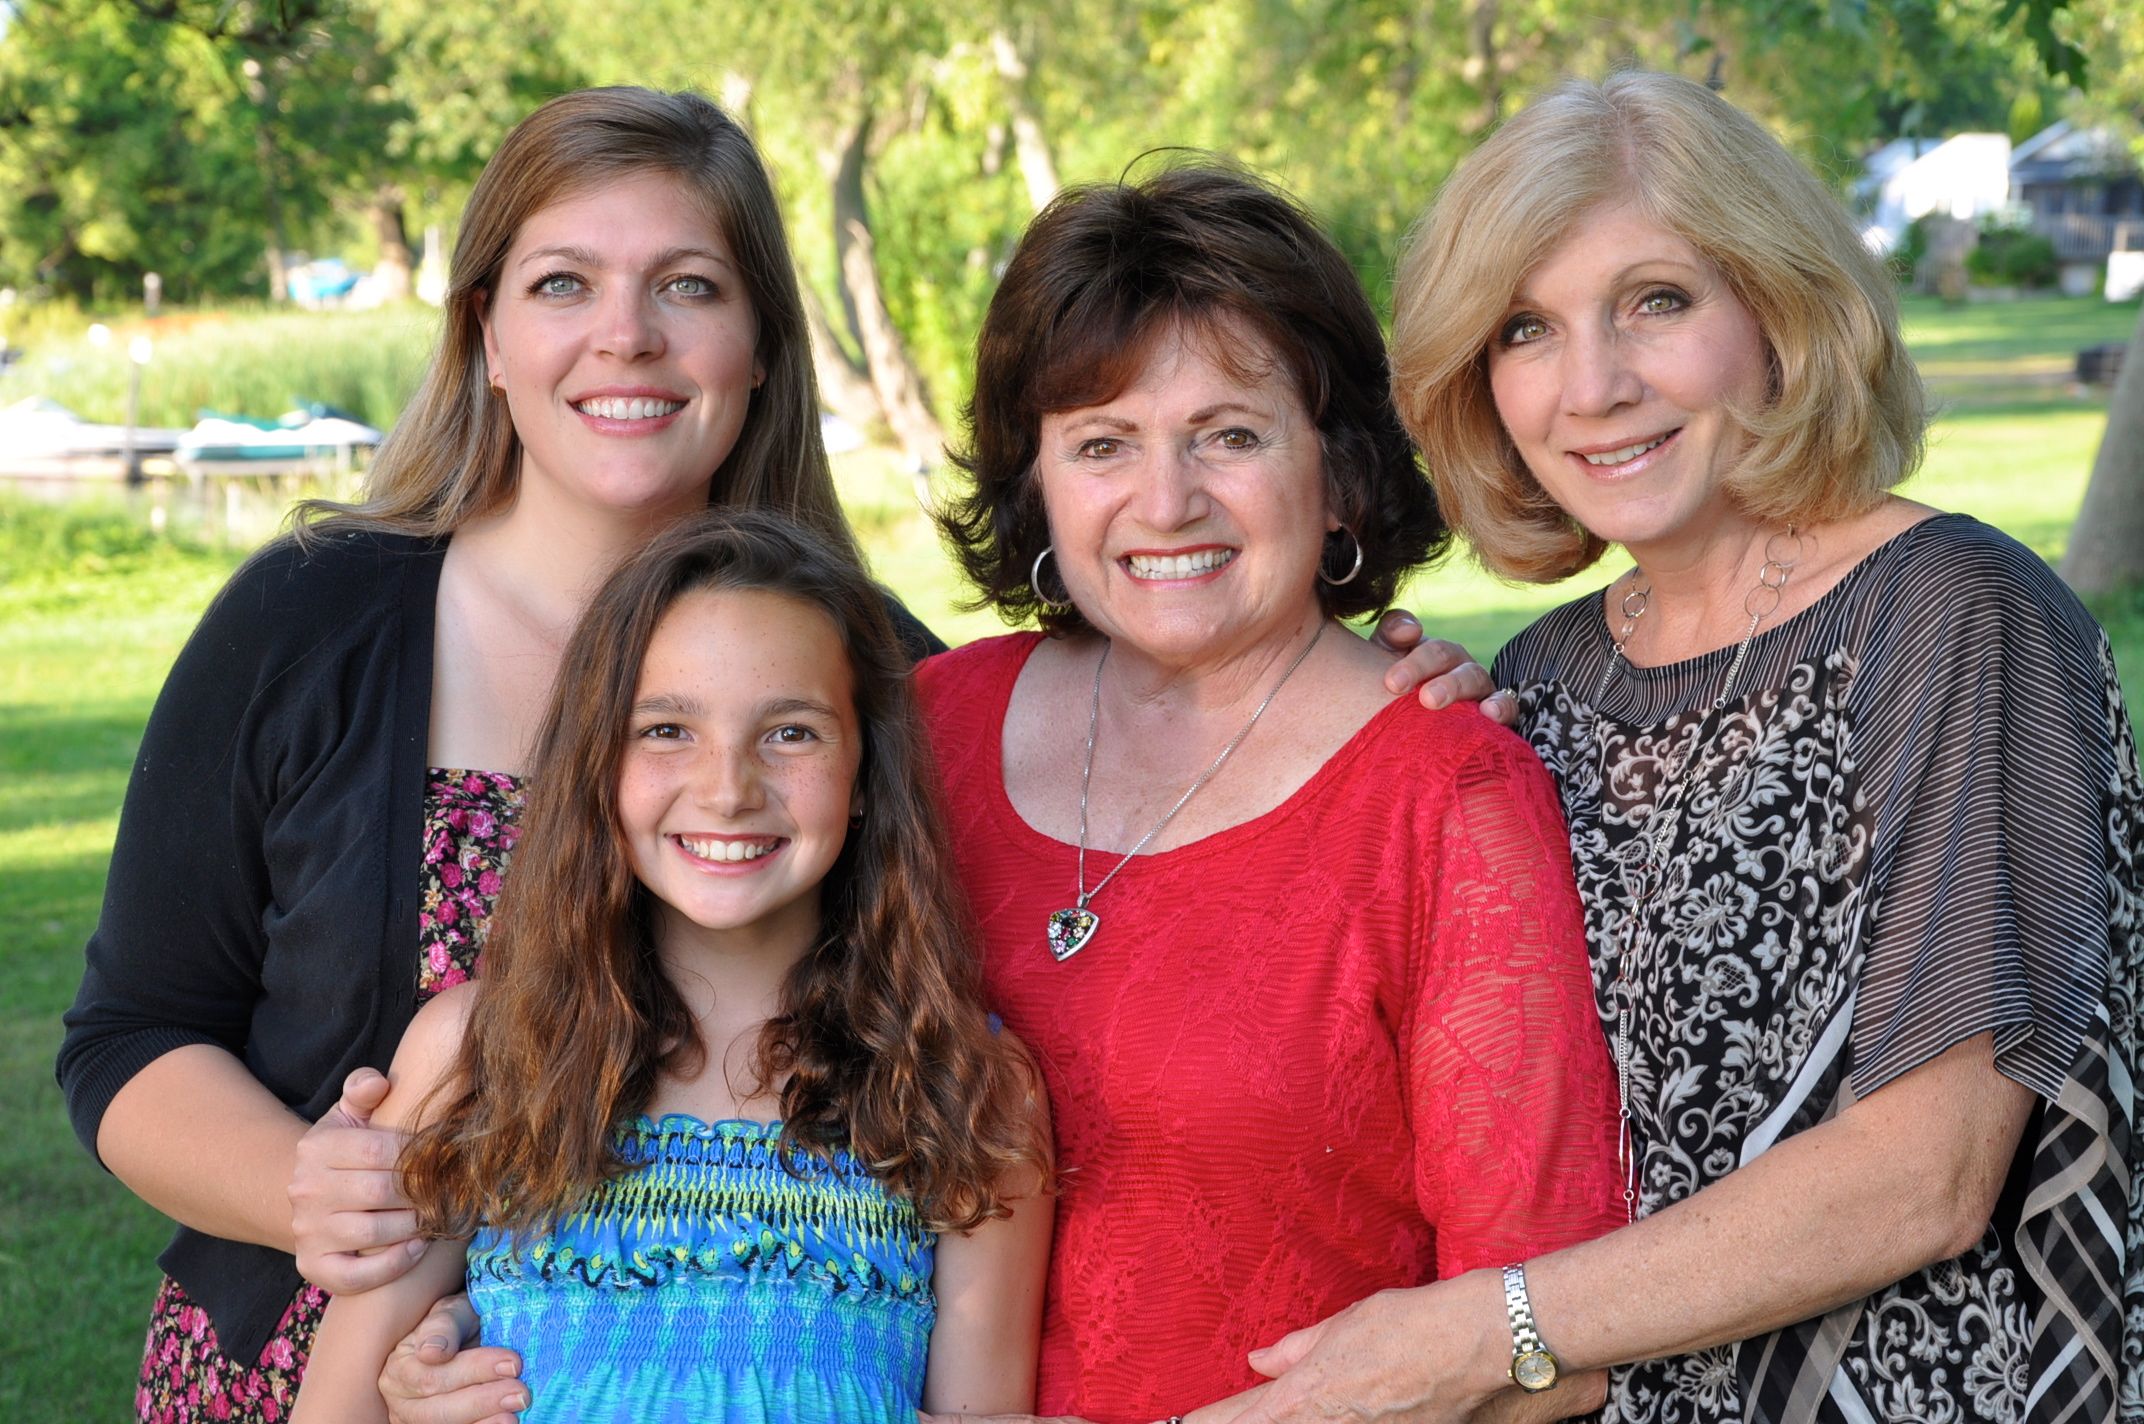 Left to right is Sheryl Stacey, our granddaughter, her daughter Noelle, Norma-Jean known as GG, and our daughter Elaine Stacey.